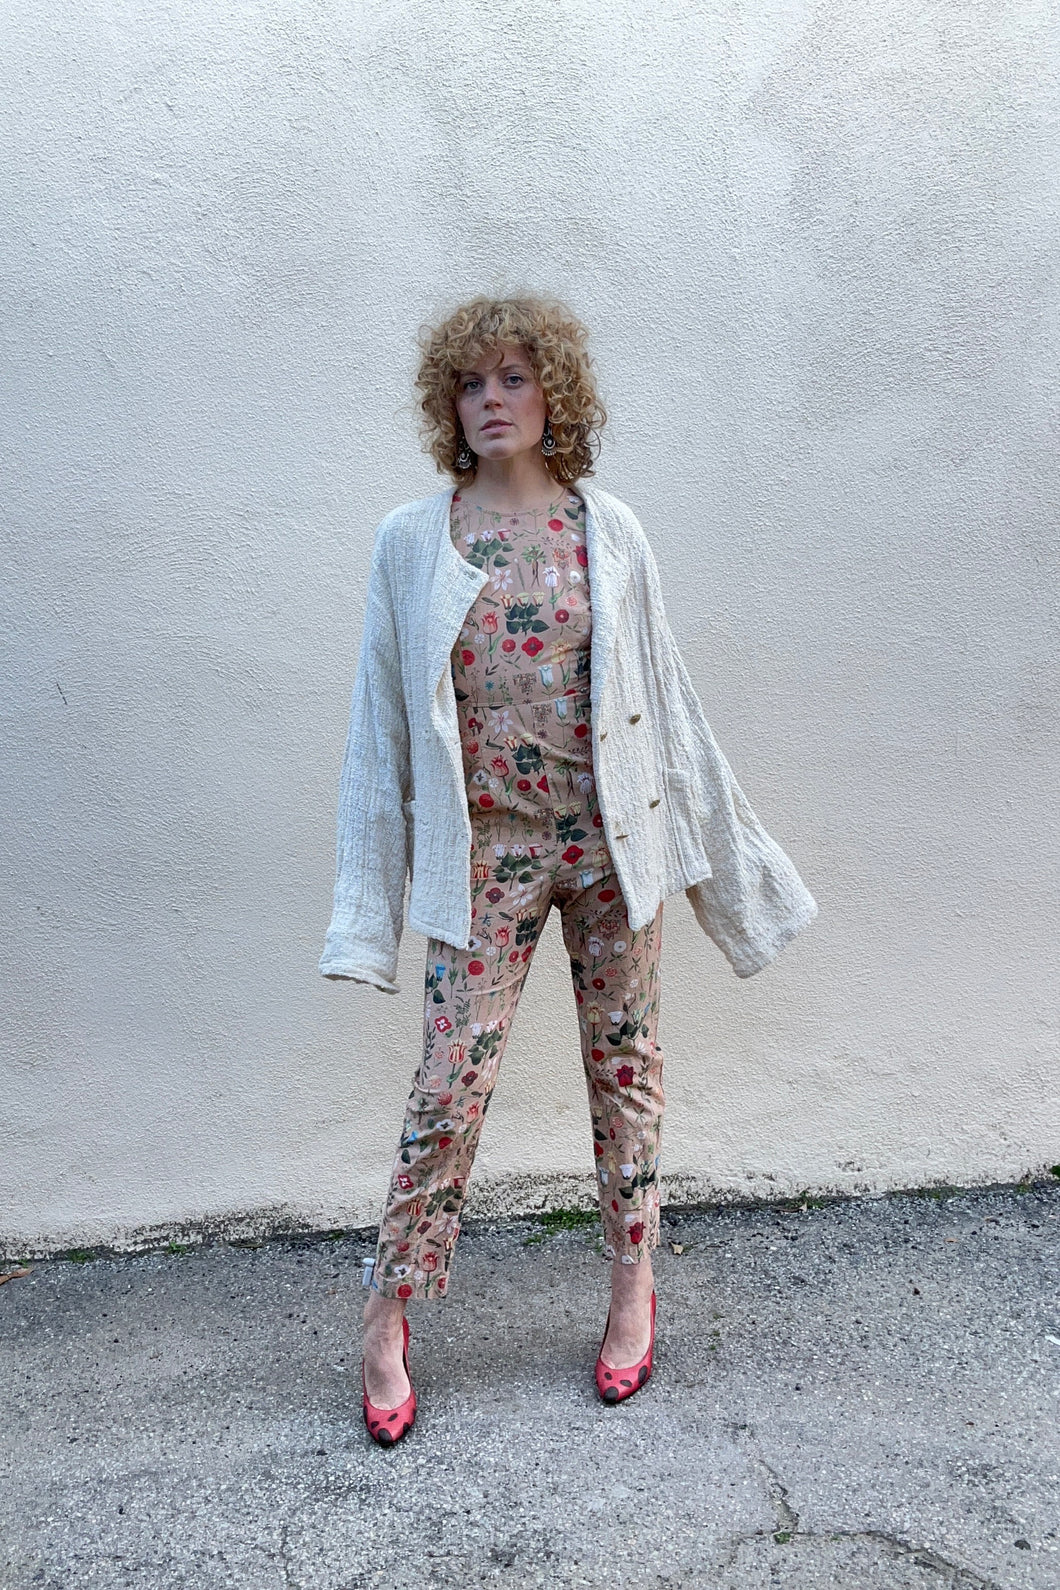 Electric Feathers Hand Woven Nubby Cotton White Envelope Coat with Vintage Brass Buttons